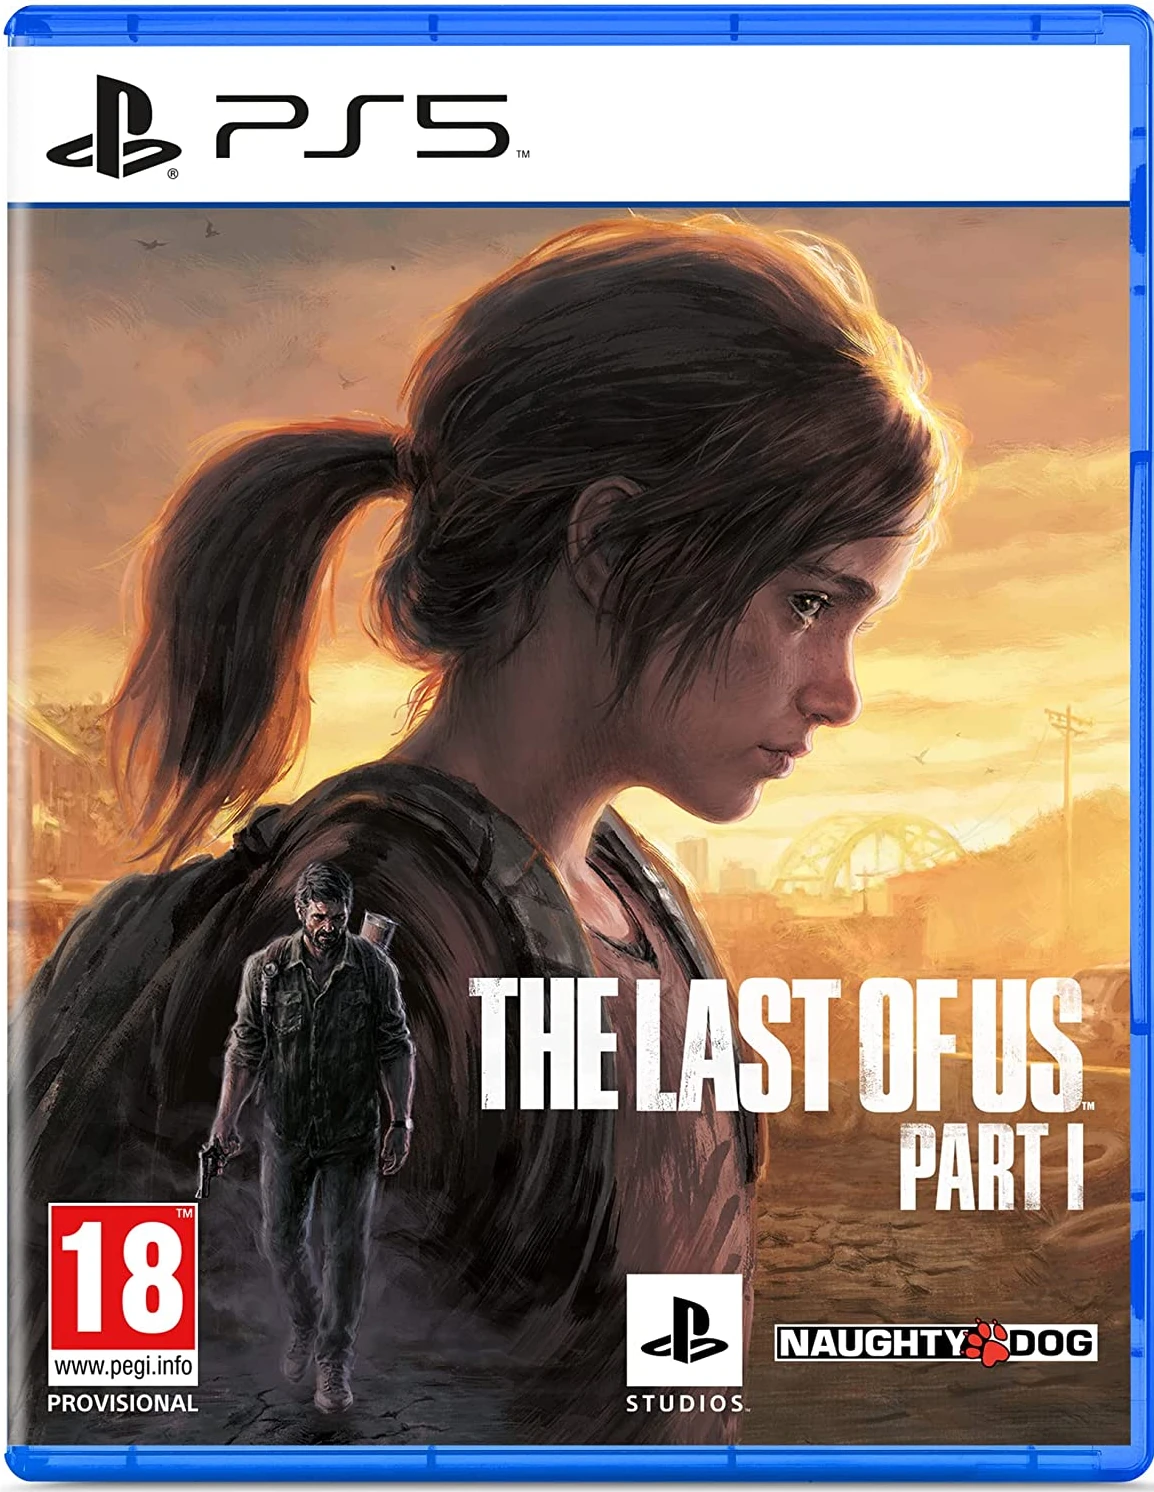 The Last of Us Part 1 + 20€ Offerts